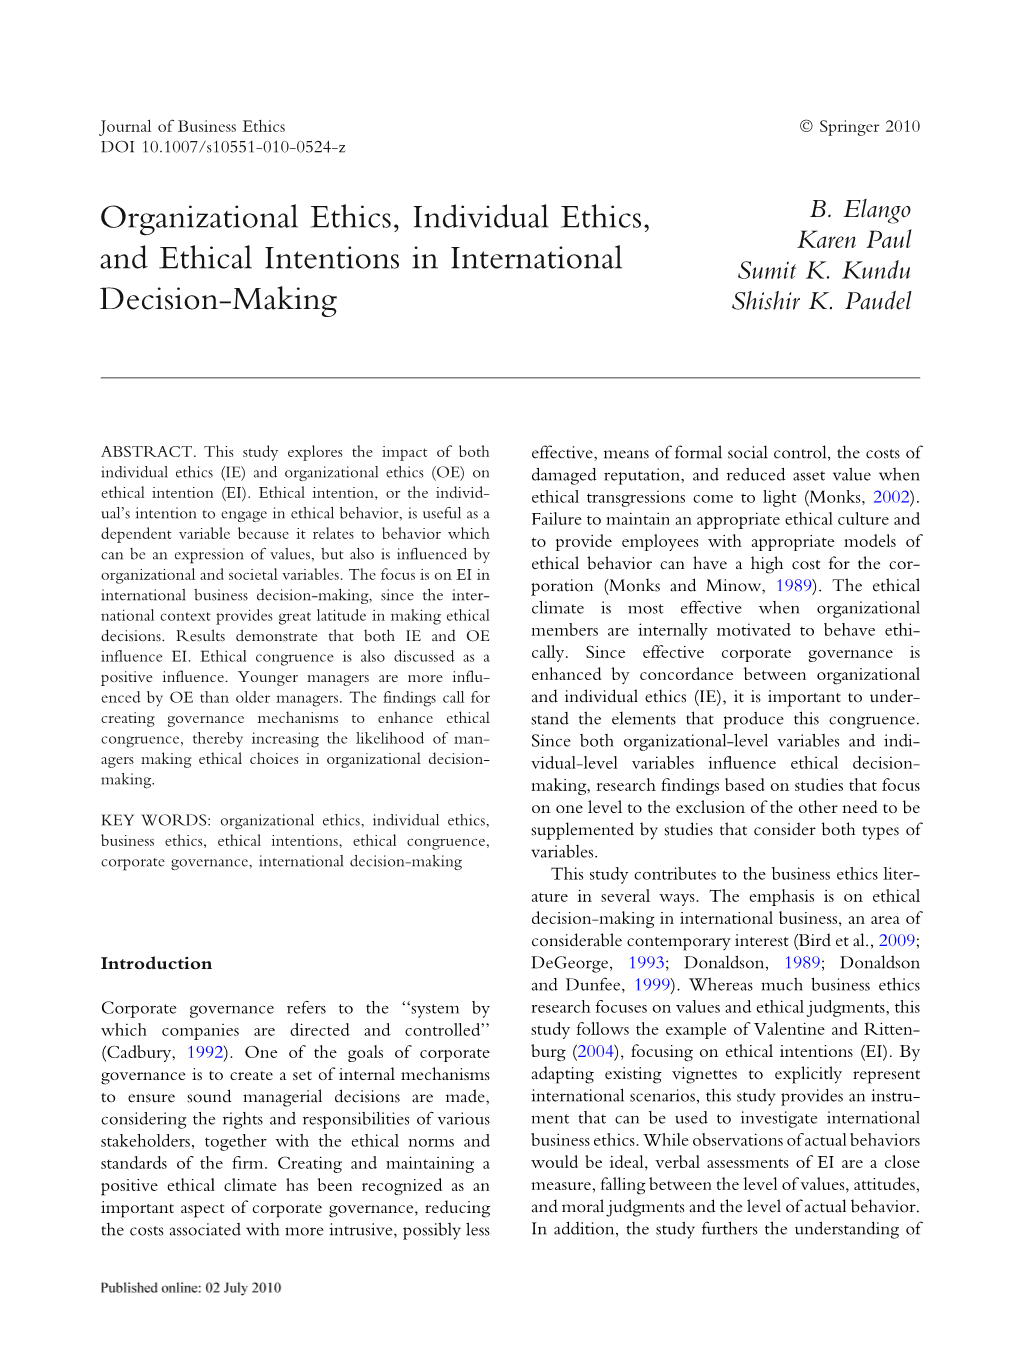 Organizational Ethics, Individual Ethics, and Ethical Intentions In